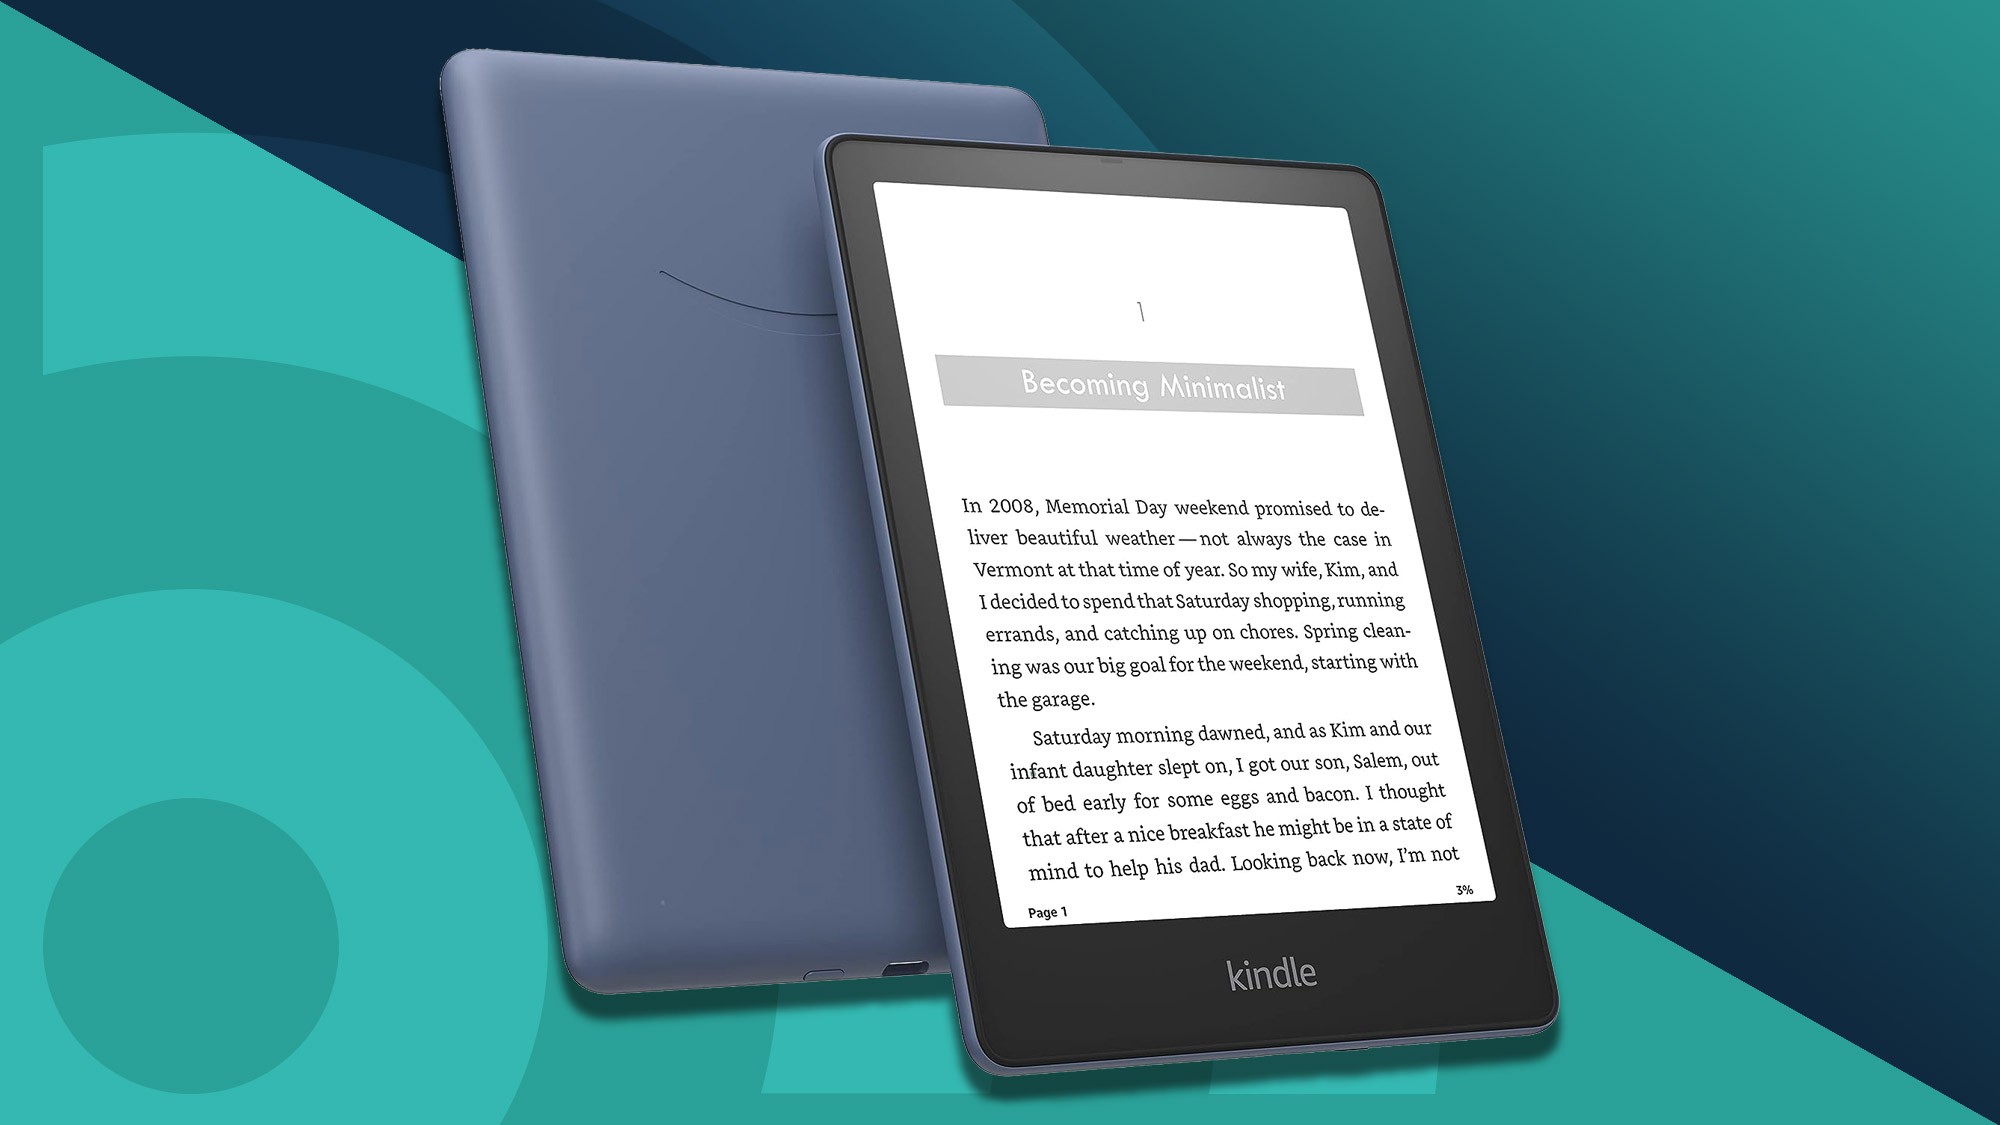 Kindle Scribe review: Largest-ever Kindle is not good enough